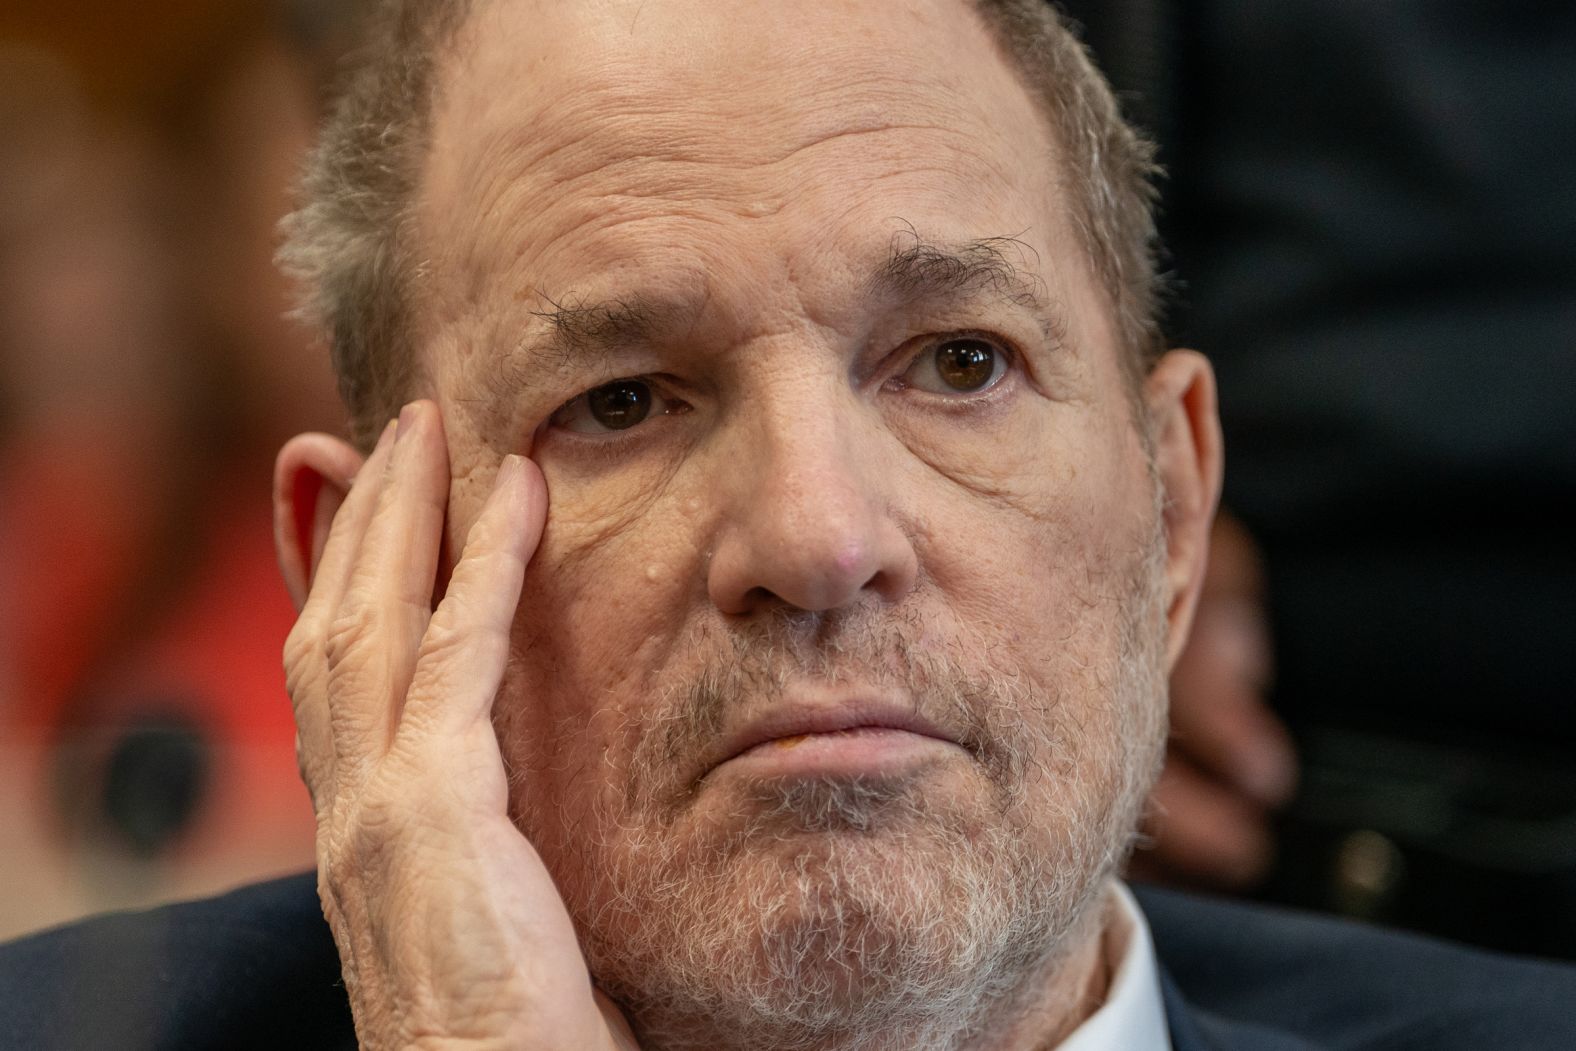 Former film producer Harvey Weinstein appears at a hearing in Manhattan Criminal Court in New York on Wednesday, May 1. It was his first public appearance since the New York State Court of Appeals <a href="index.php?page=&url=https%3A%2F%2Fwww.cnn.com%2F2024%2F04%2F25%2Fus%2Fharvey-weinstein-conviction-overturned-appeal%2Findex.html" target="_blank">overturned his 2020 rape conviction and ordered a new trial</a>.